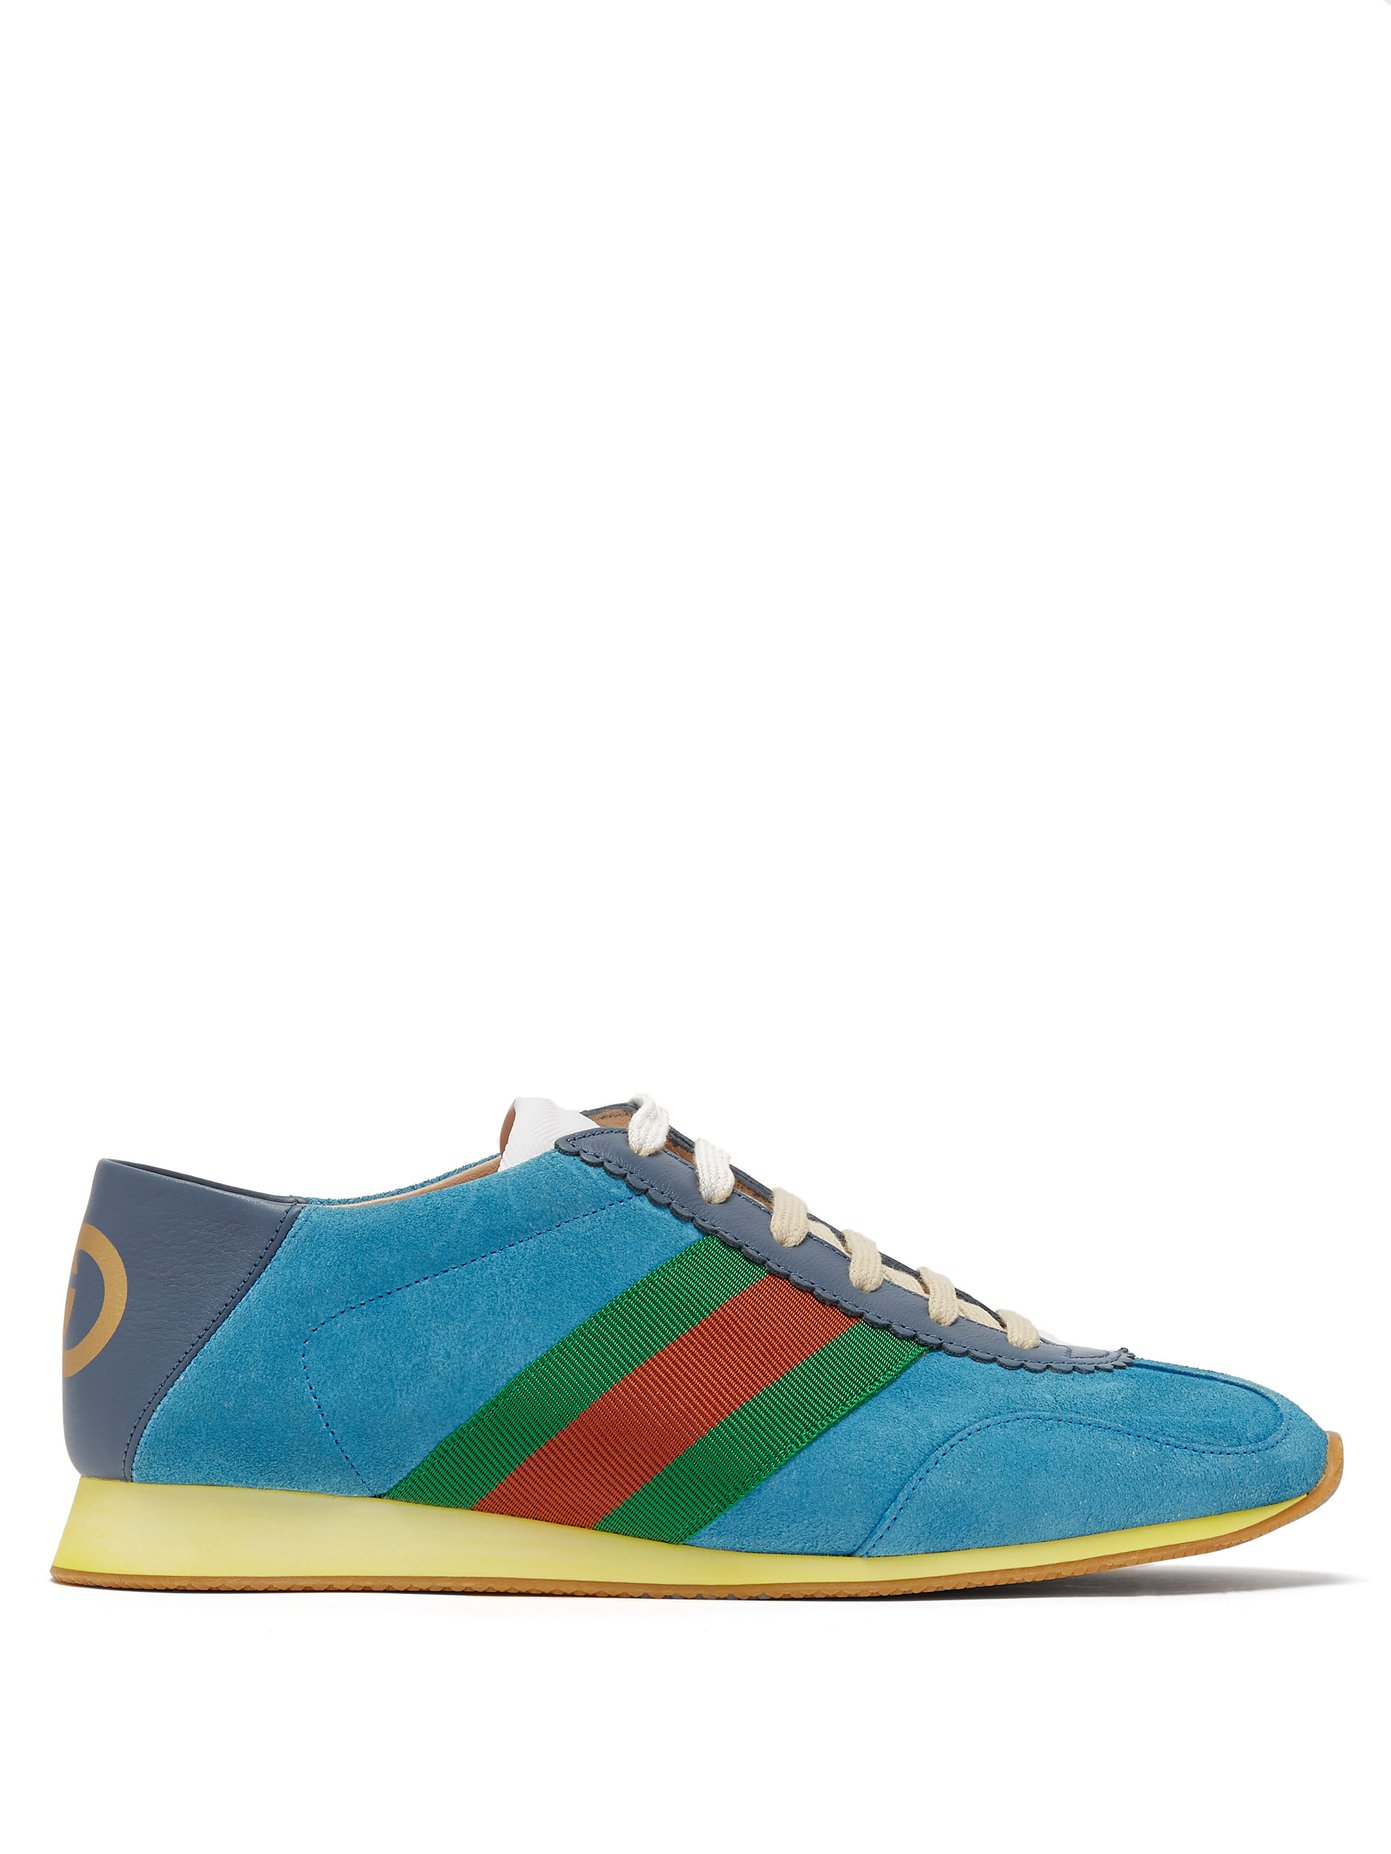 Rocket suede low-top trainers | Gucci 